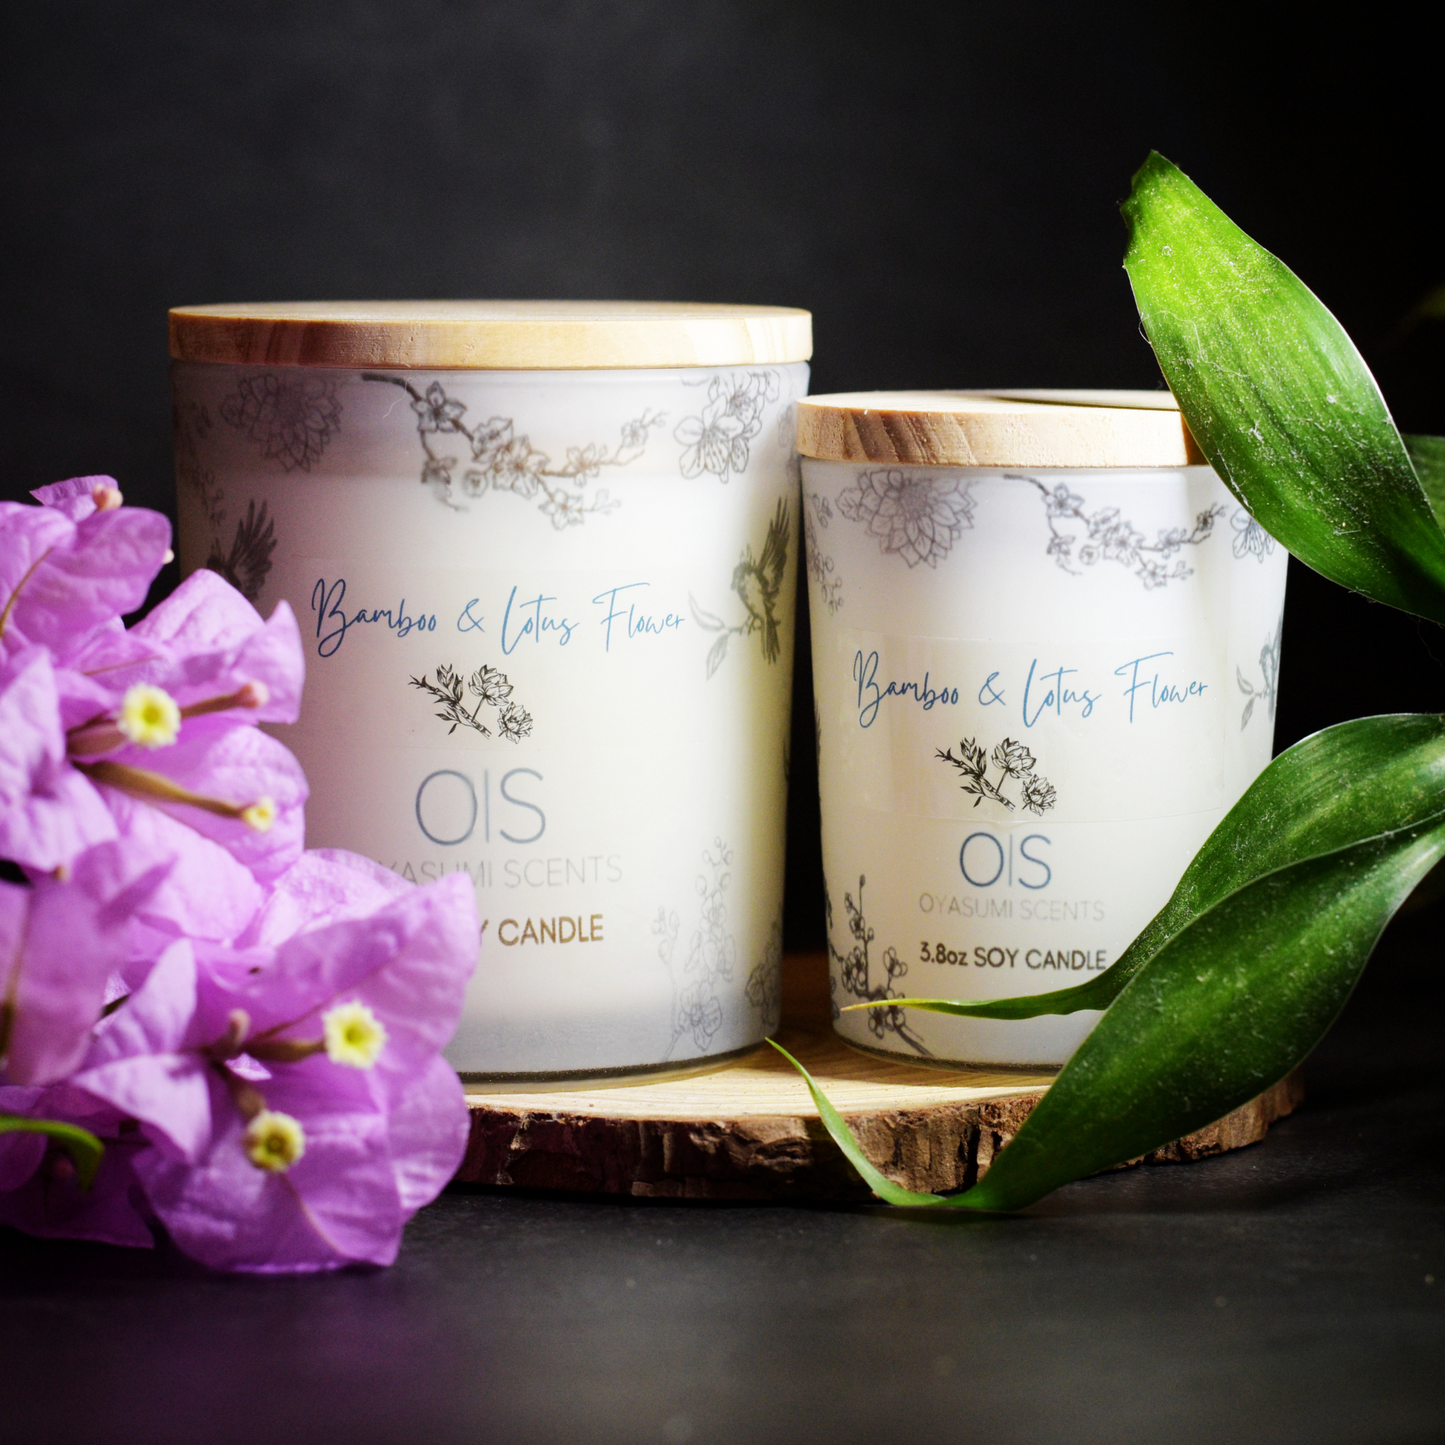 Bamboo & Lotus Flower Soy Candle [COMMUNE X OS LIMITED EDITION]